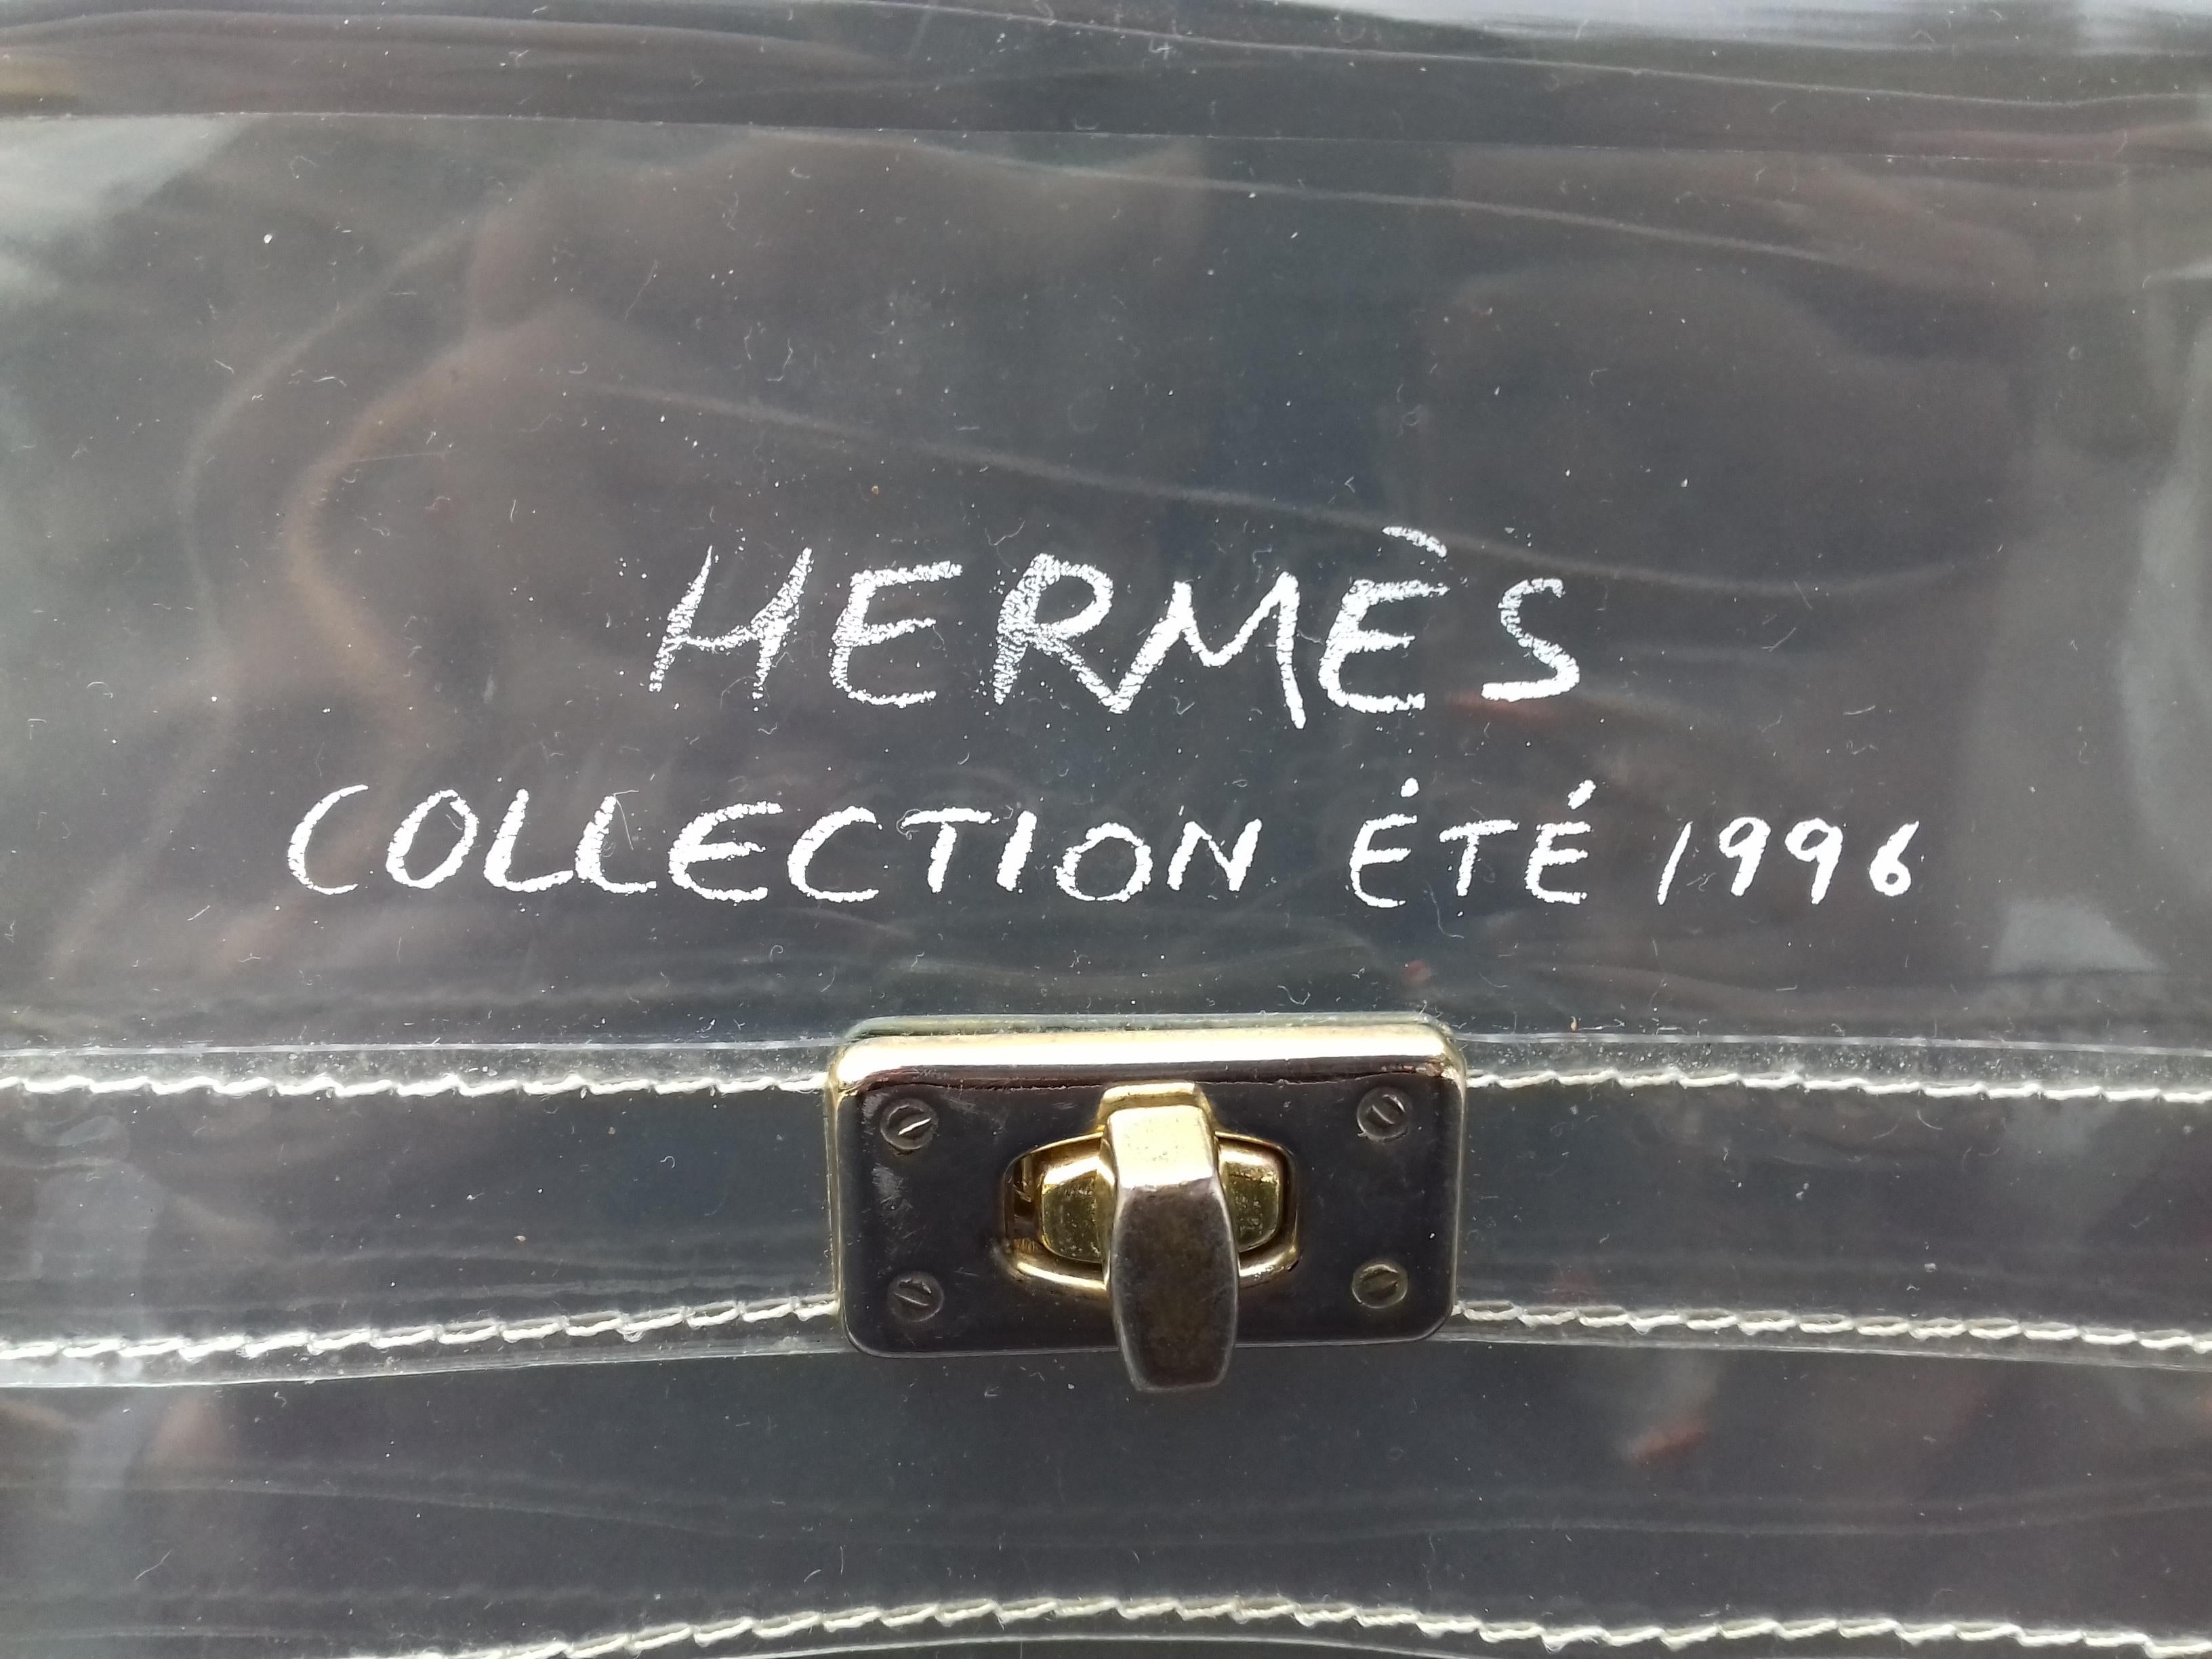 Women's Hermès See-Through Kelly Clear Security Bag Check-in 1996 32 cm Collector